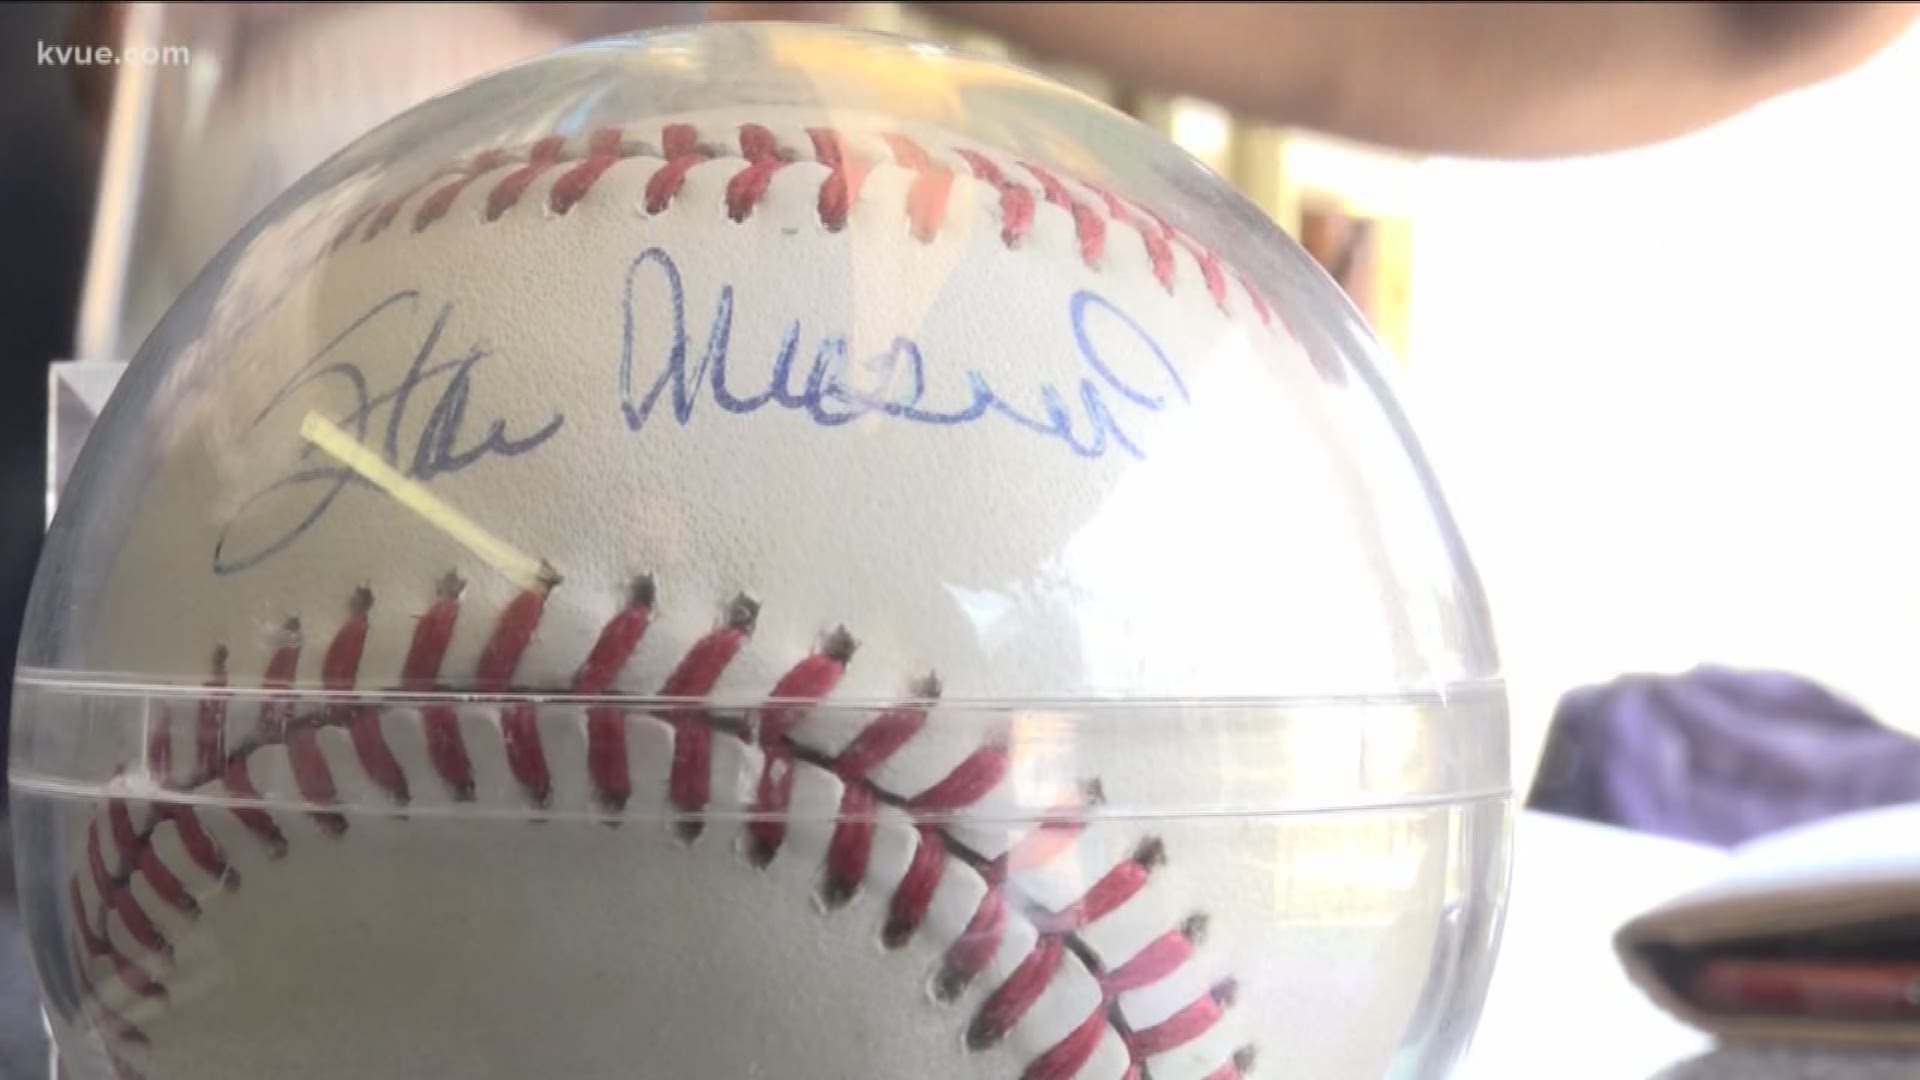 Austinite donates MLB baseball's to raise thousands of dollars for two local teams.